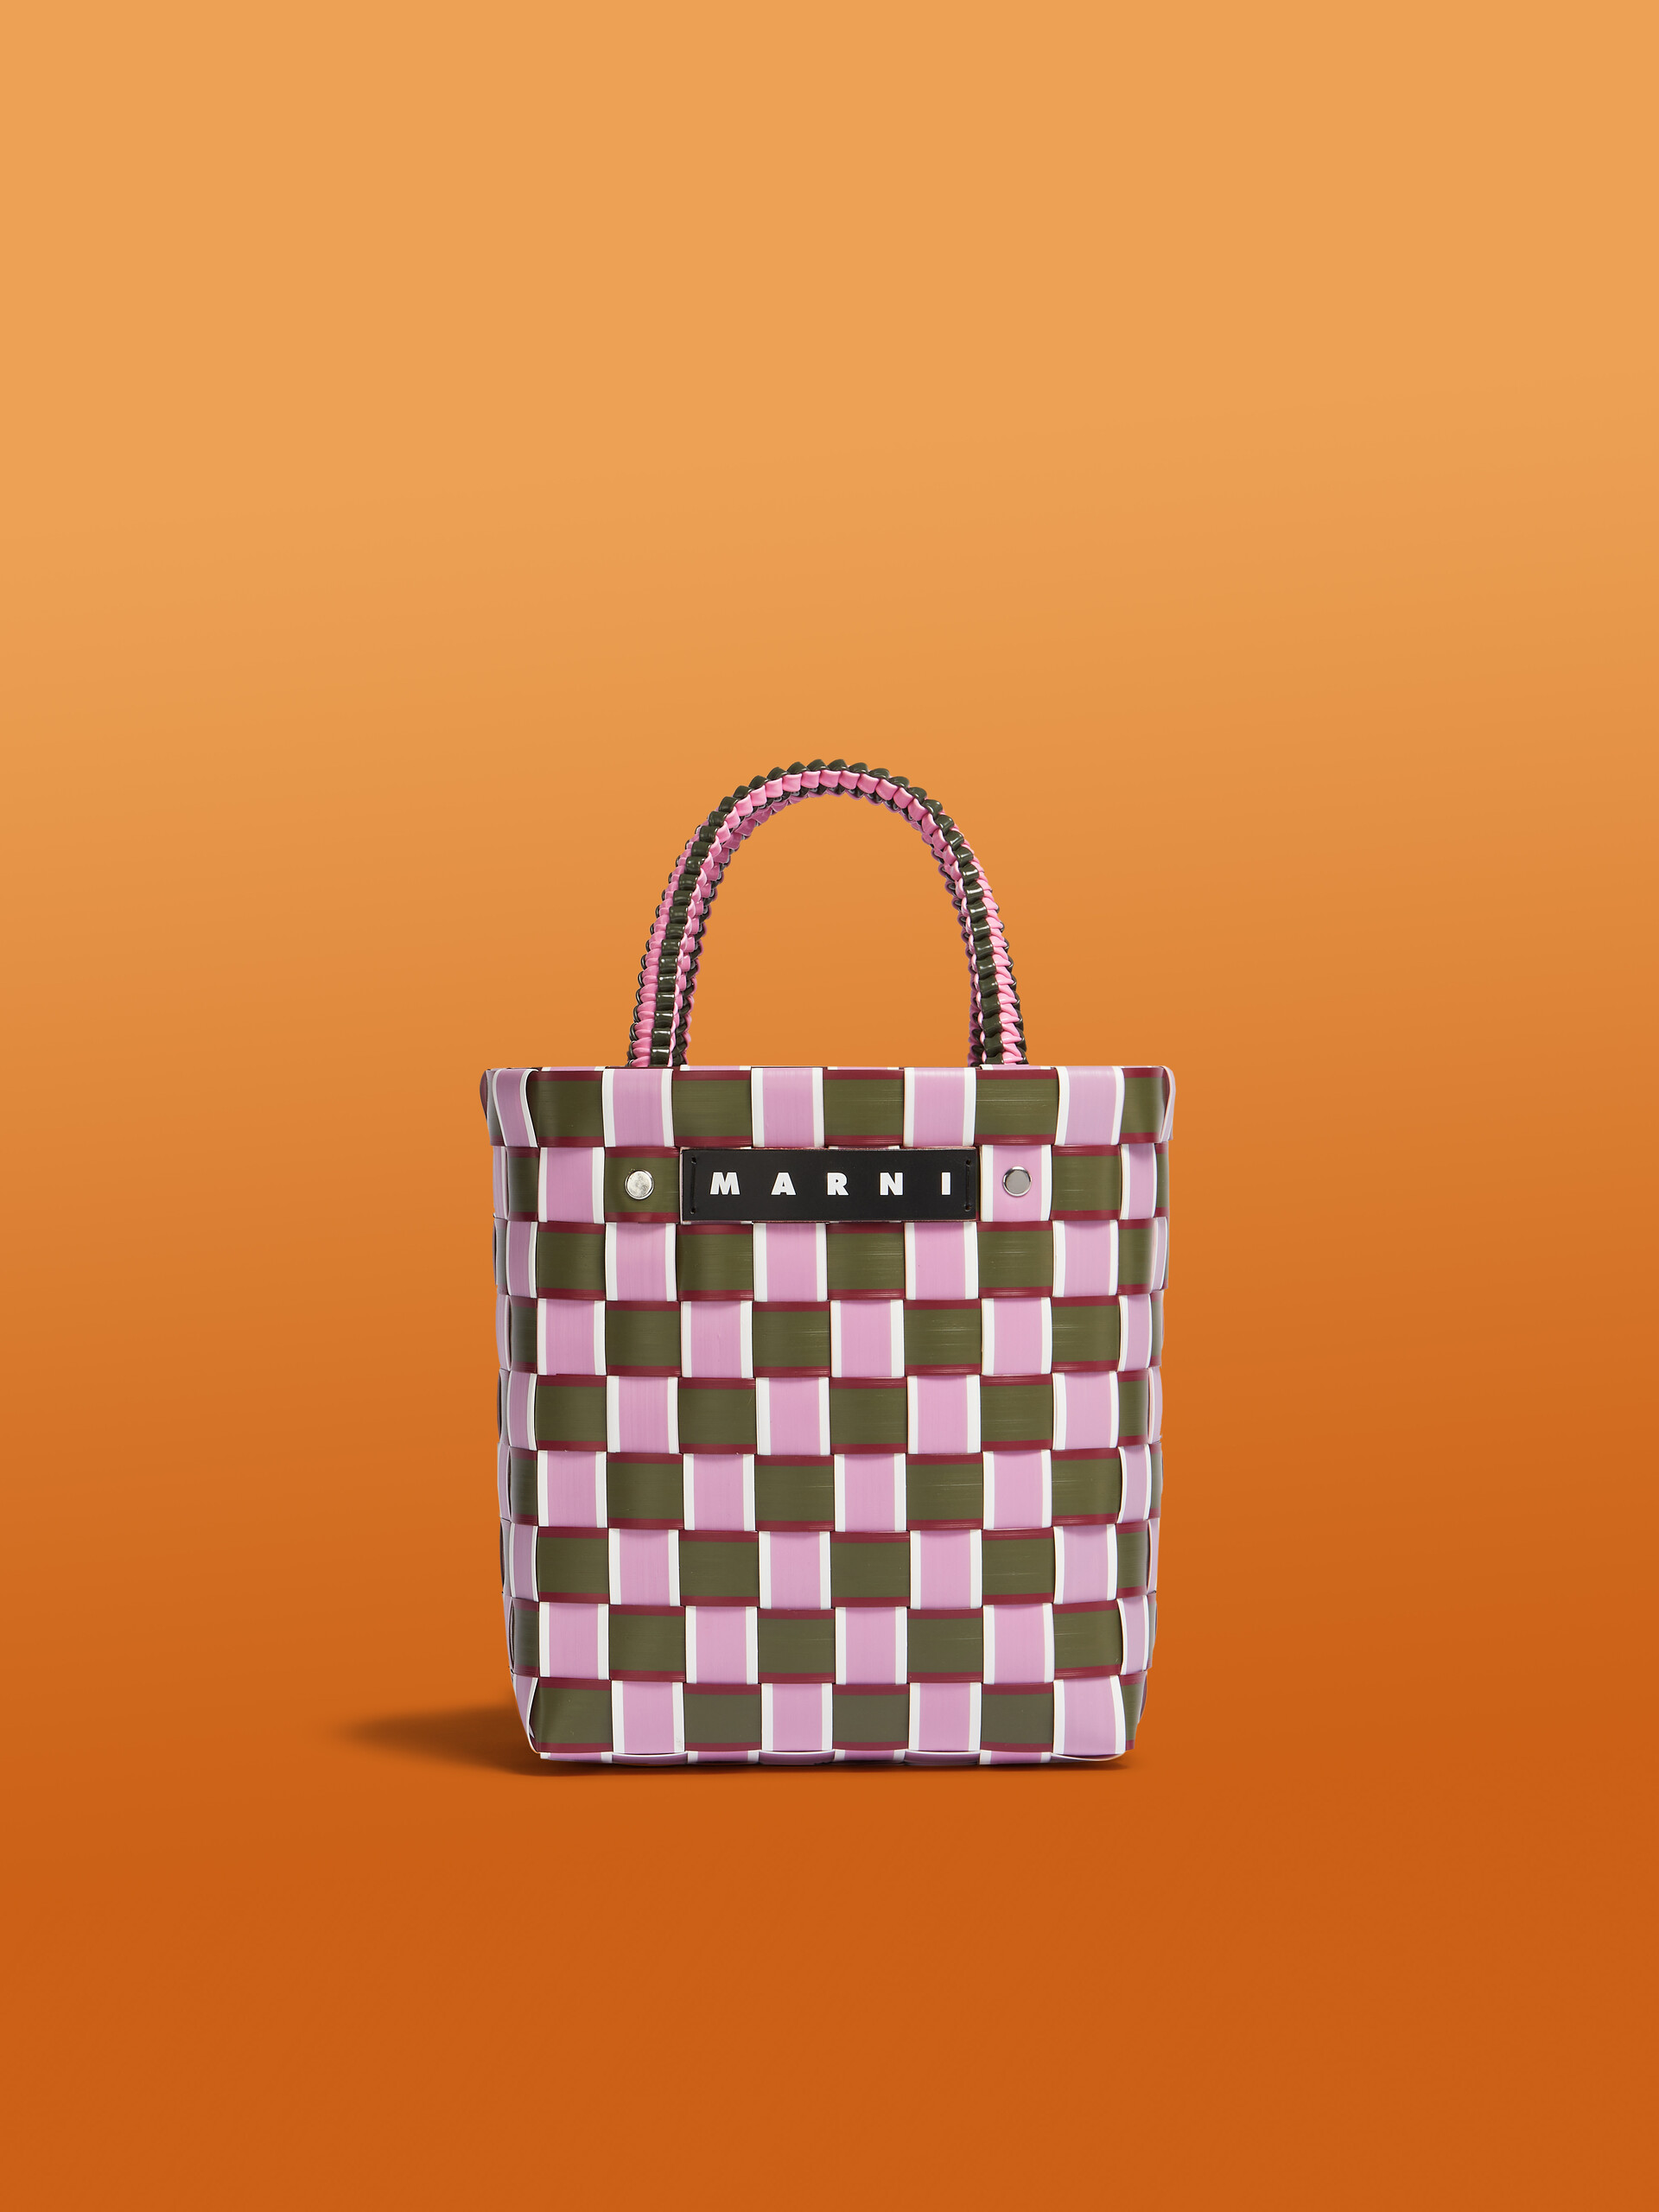 MARNI MARKET TAPE BASKET bag in orange and black woven material - Shopping Bags - Image 1